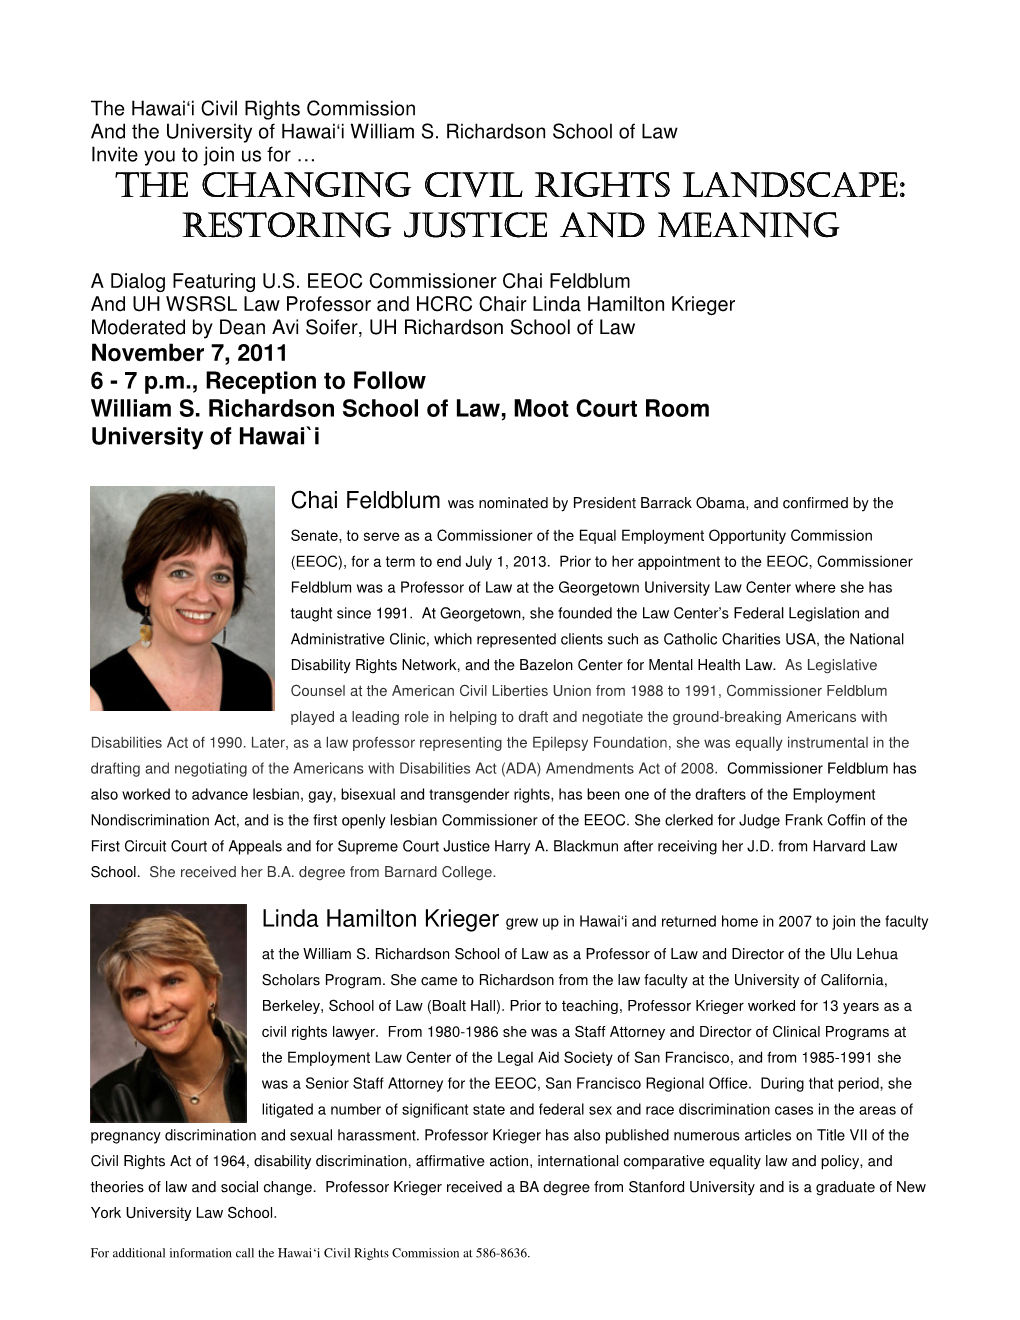 The Changing Civil Rights Landscape: Restoring Justice and Meaning